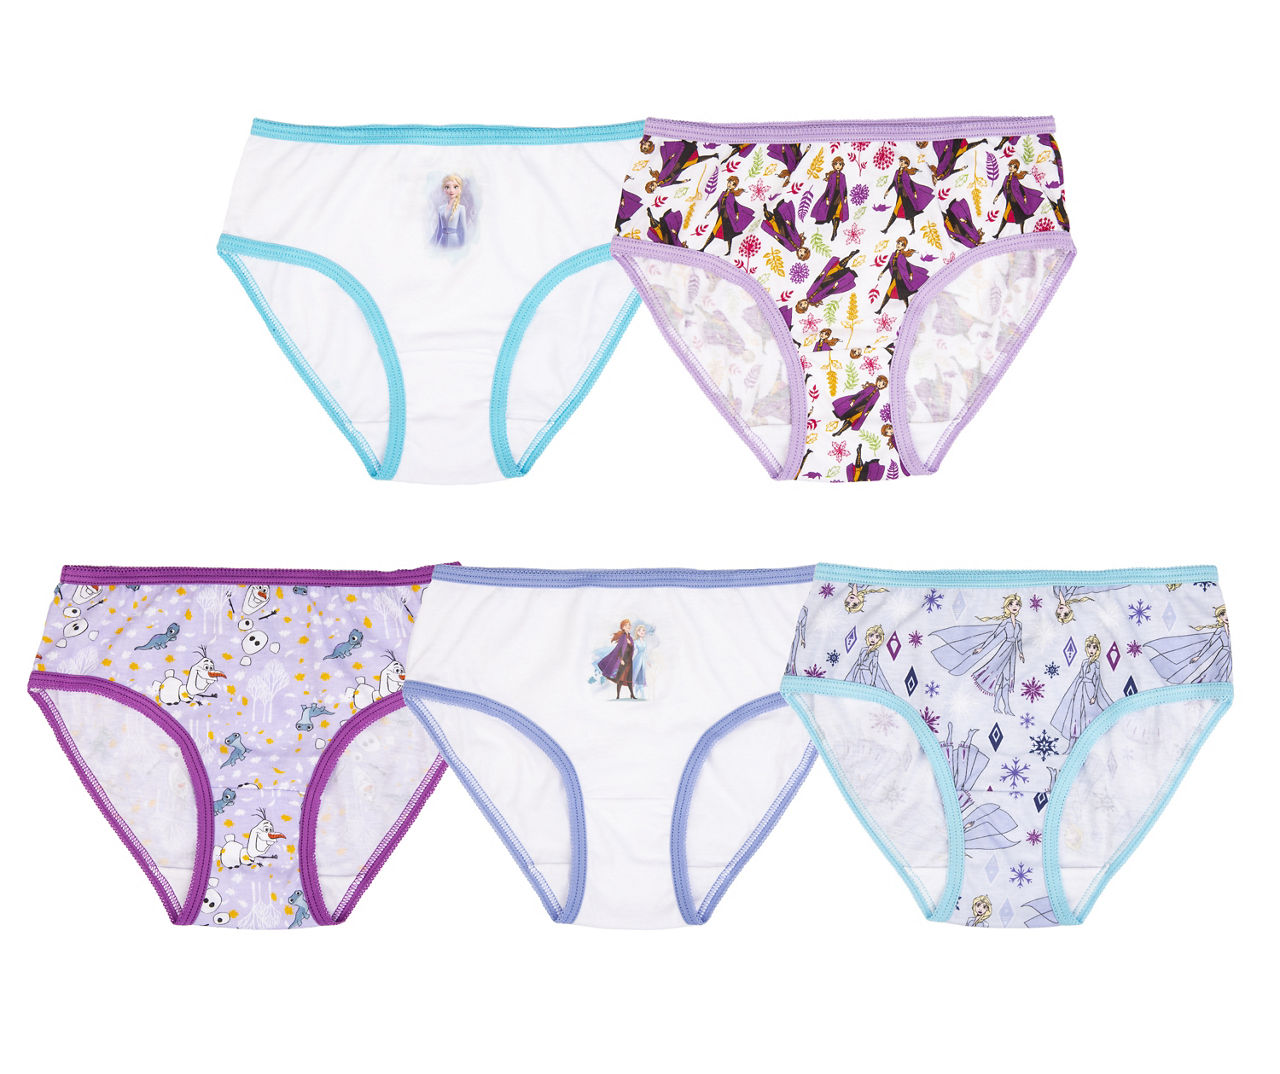 Kids' Size 8 White, Purple & Blue Briefs With Coloring Page, 5-Pack